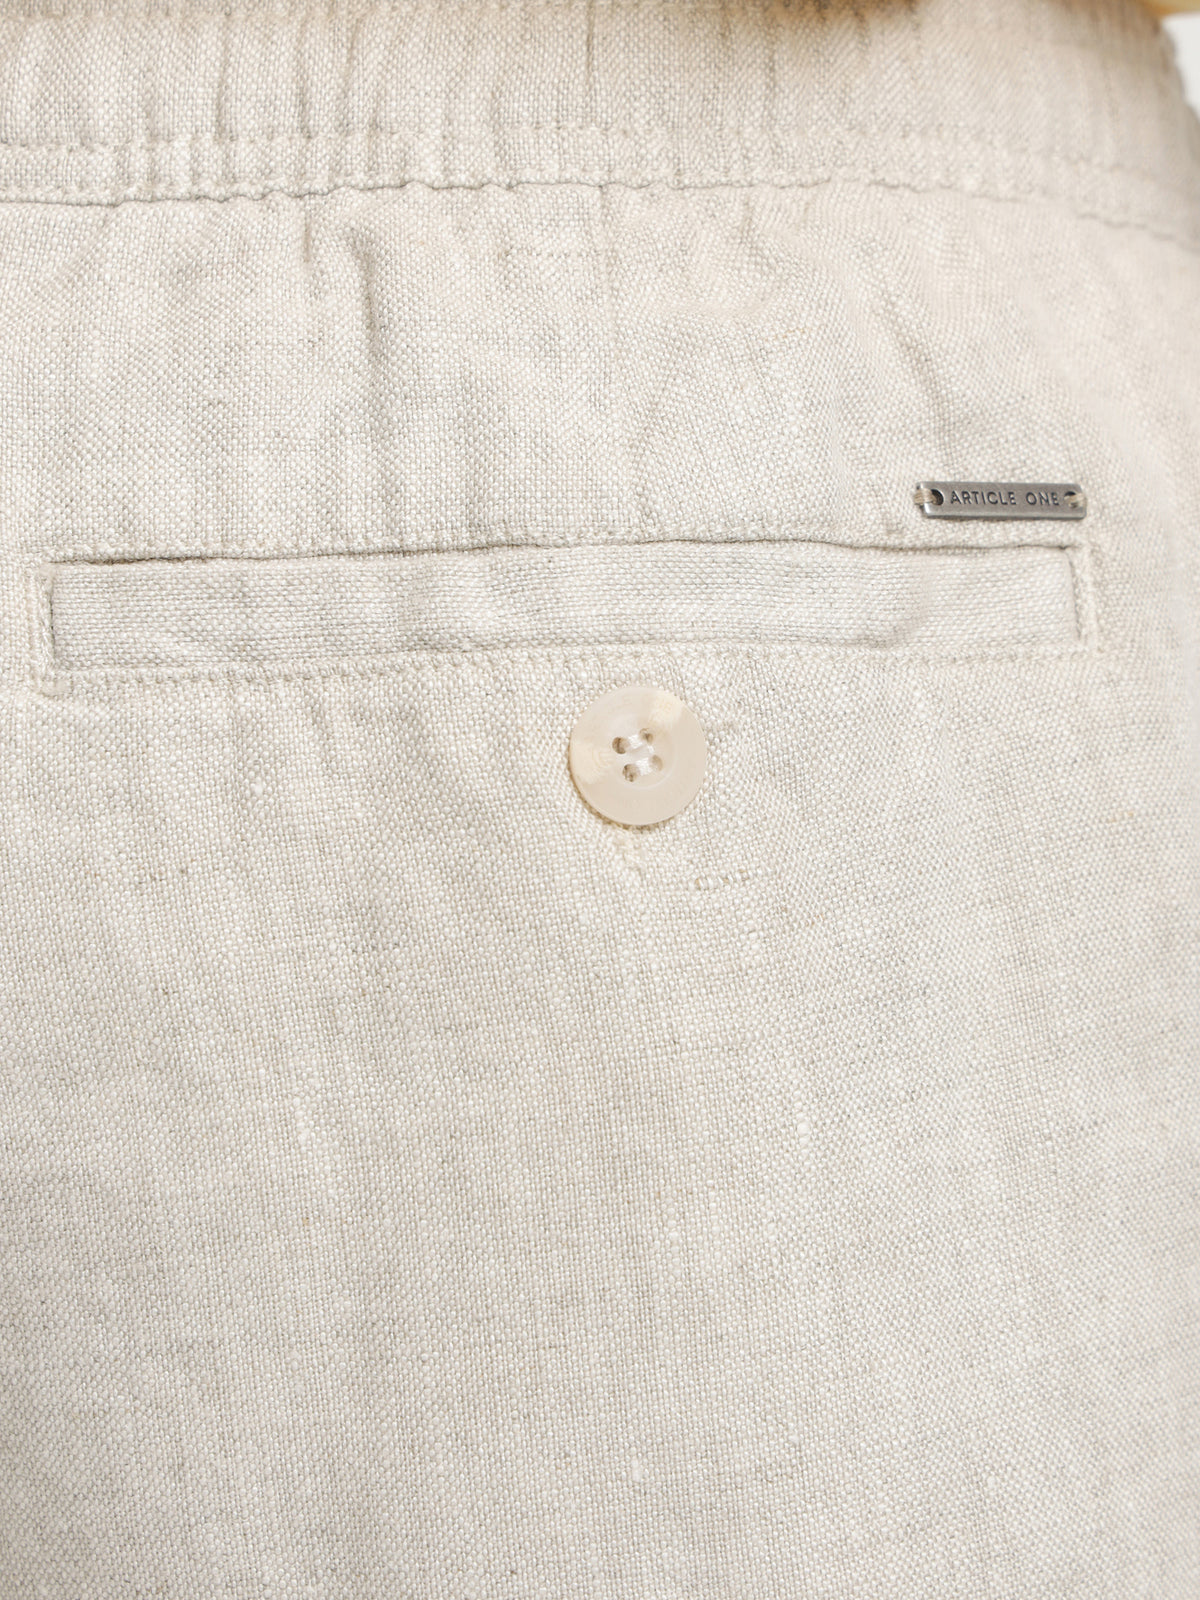 Nero Linen Shorts in Natural Marle